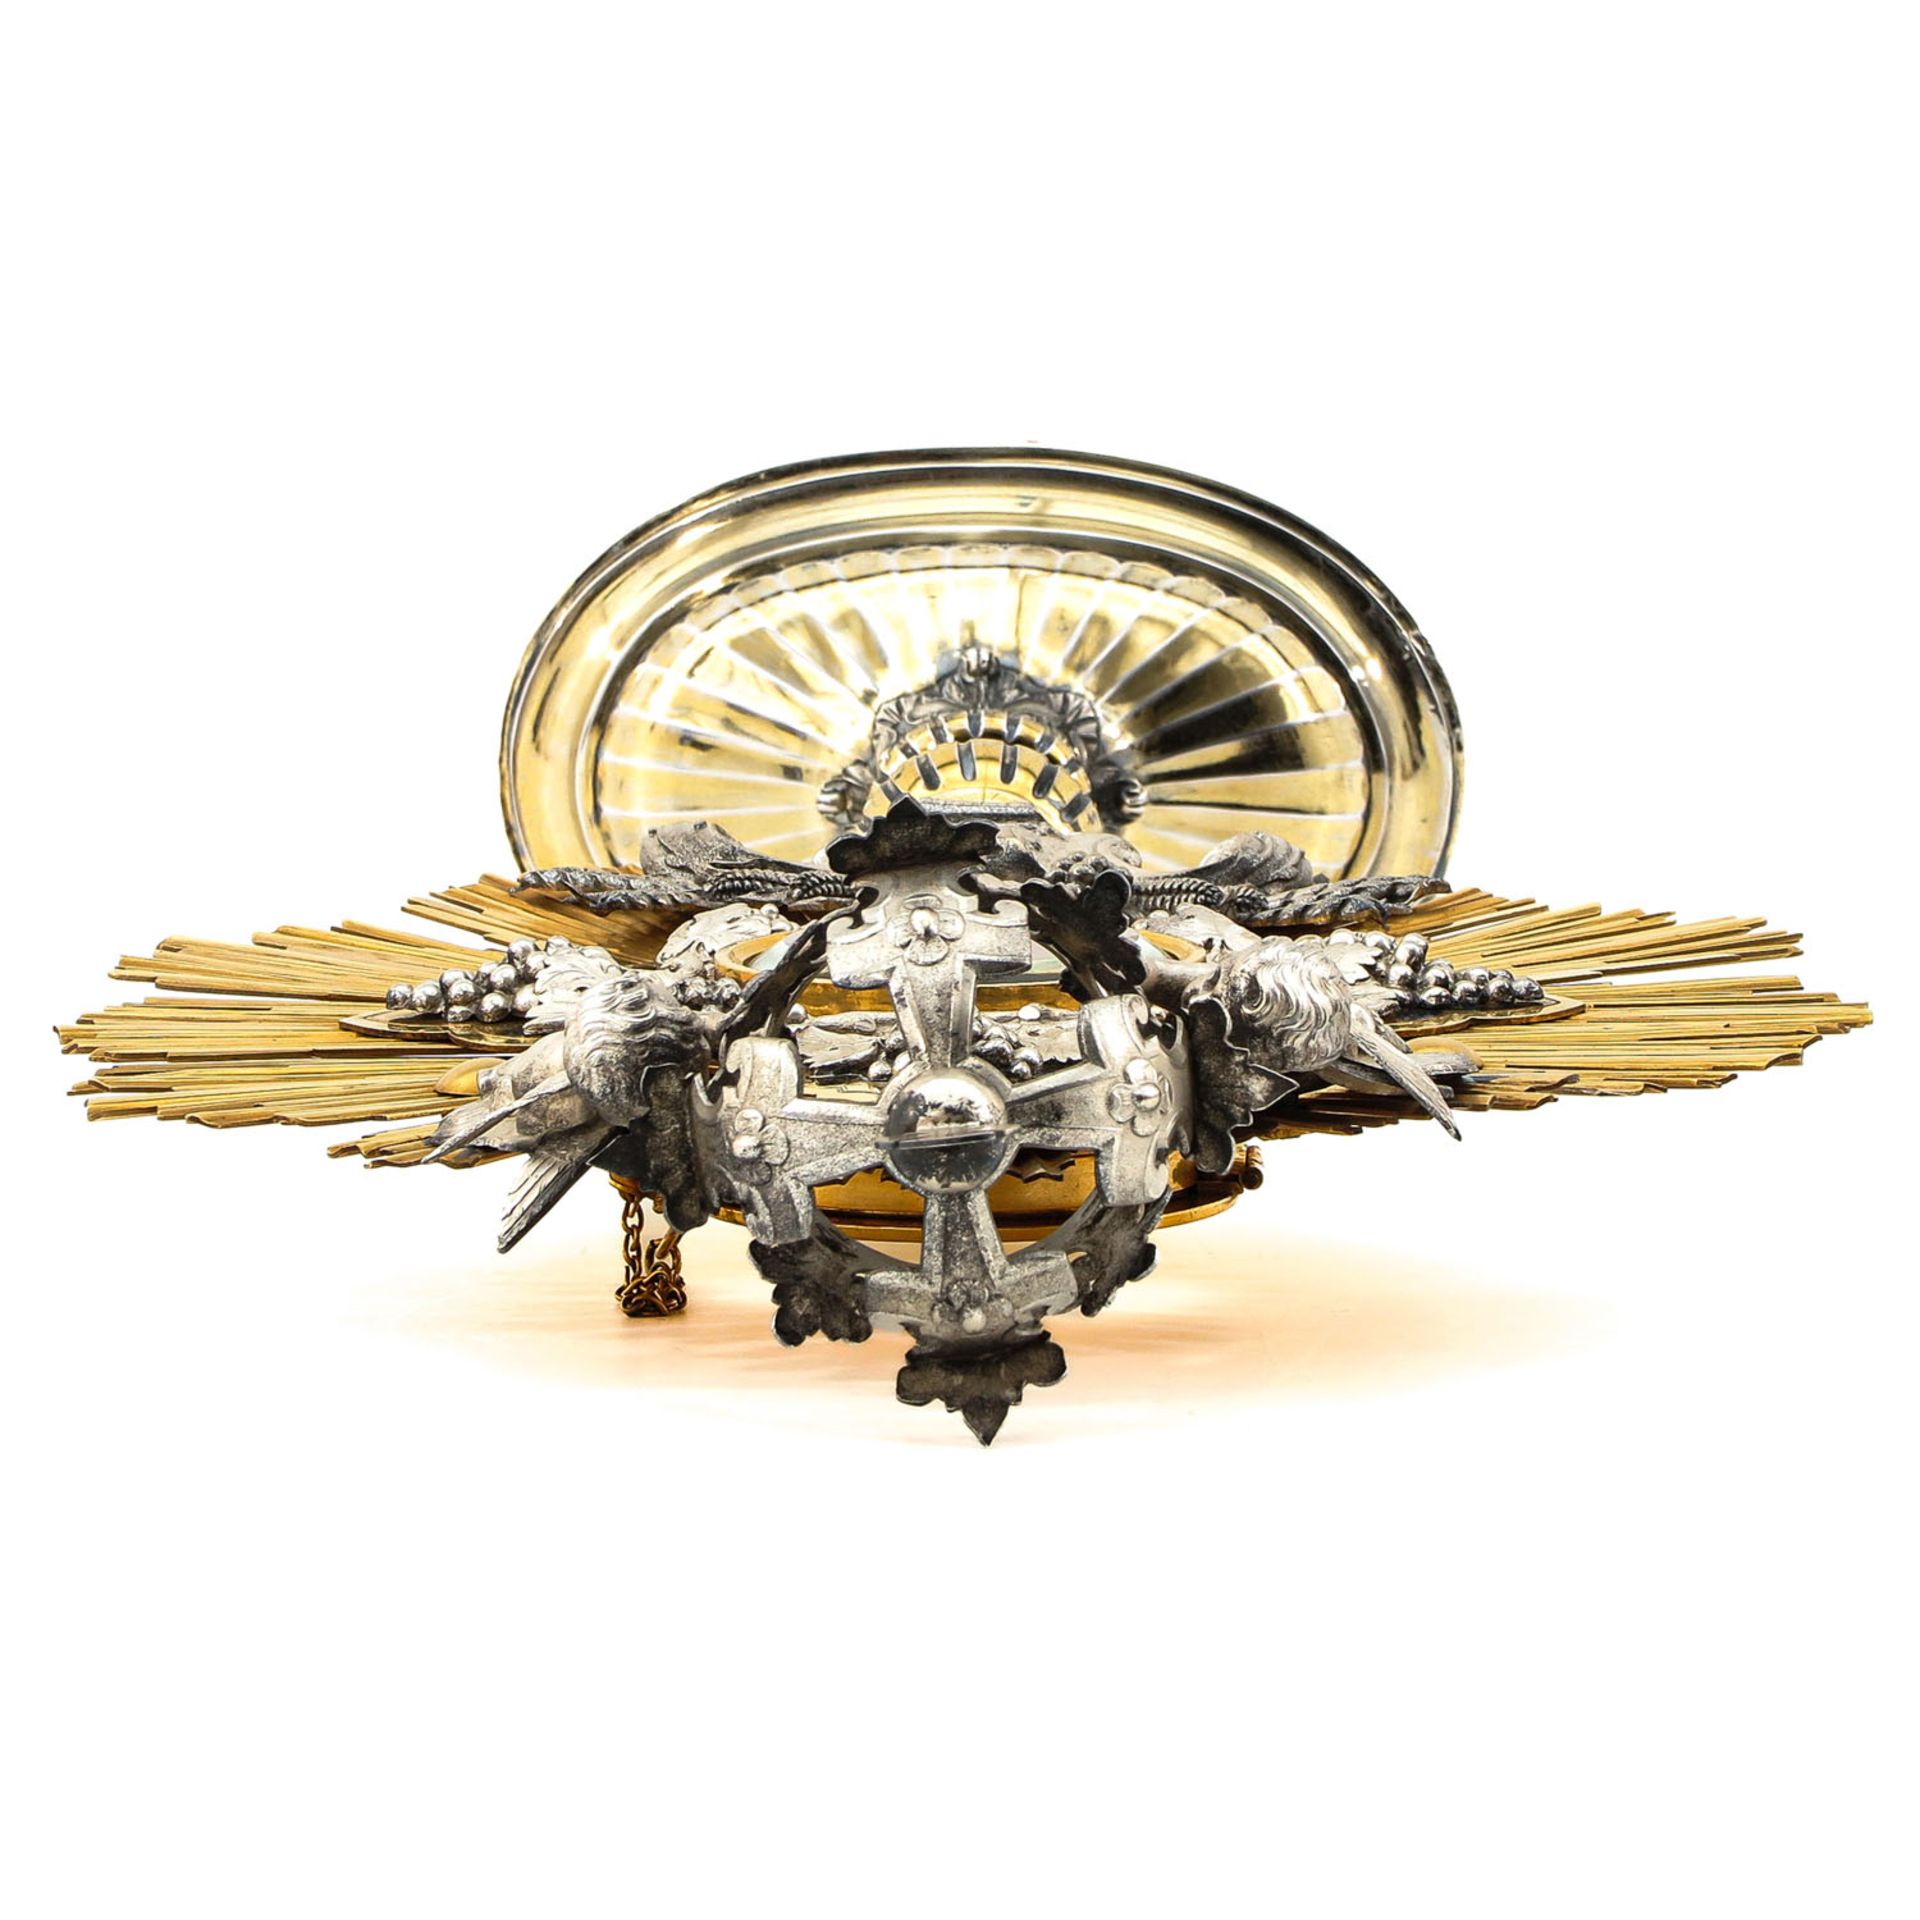 A Silver Monstrance - Image 5 of 10